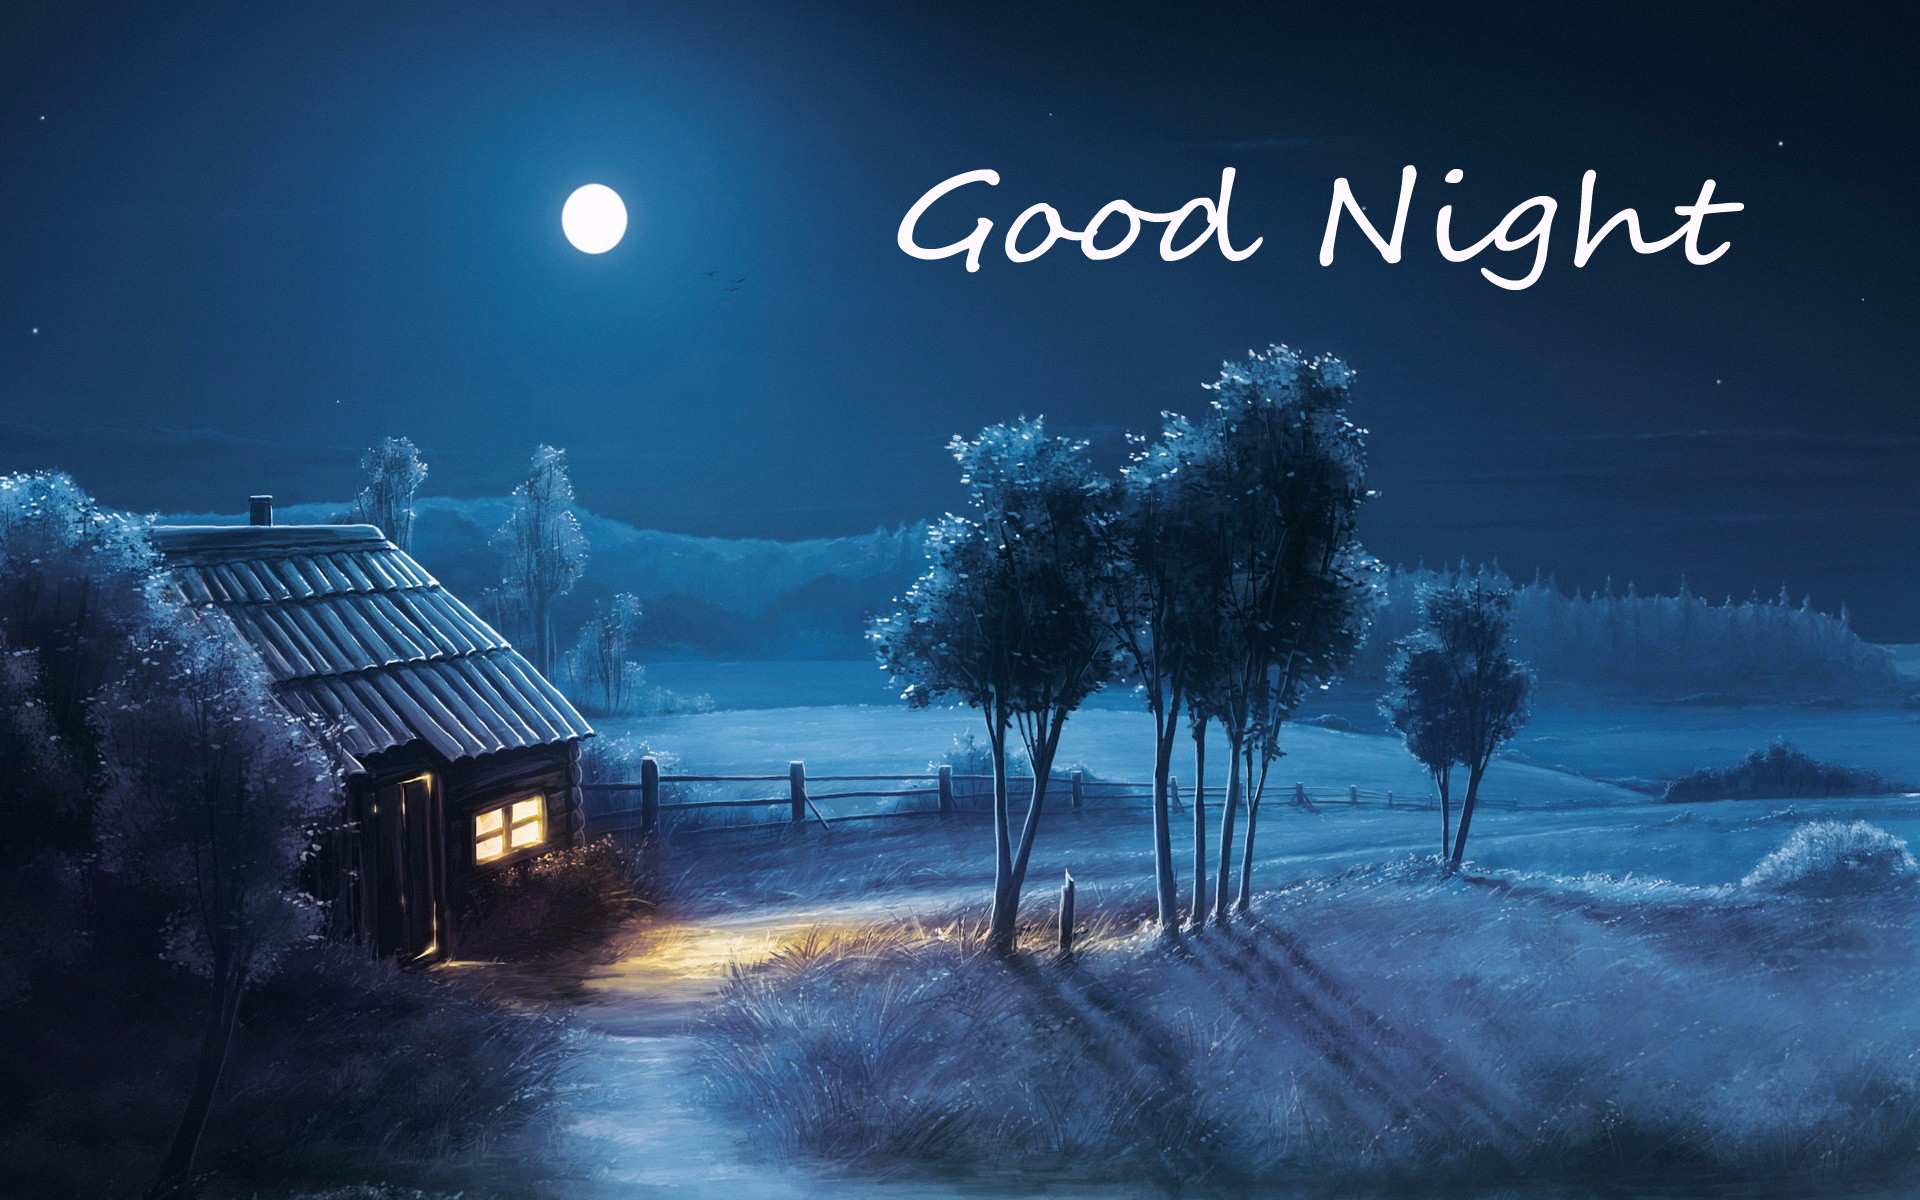 Good Night Winter Snow House In The Village The Best Greeting Card For You